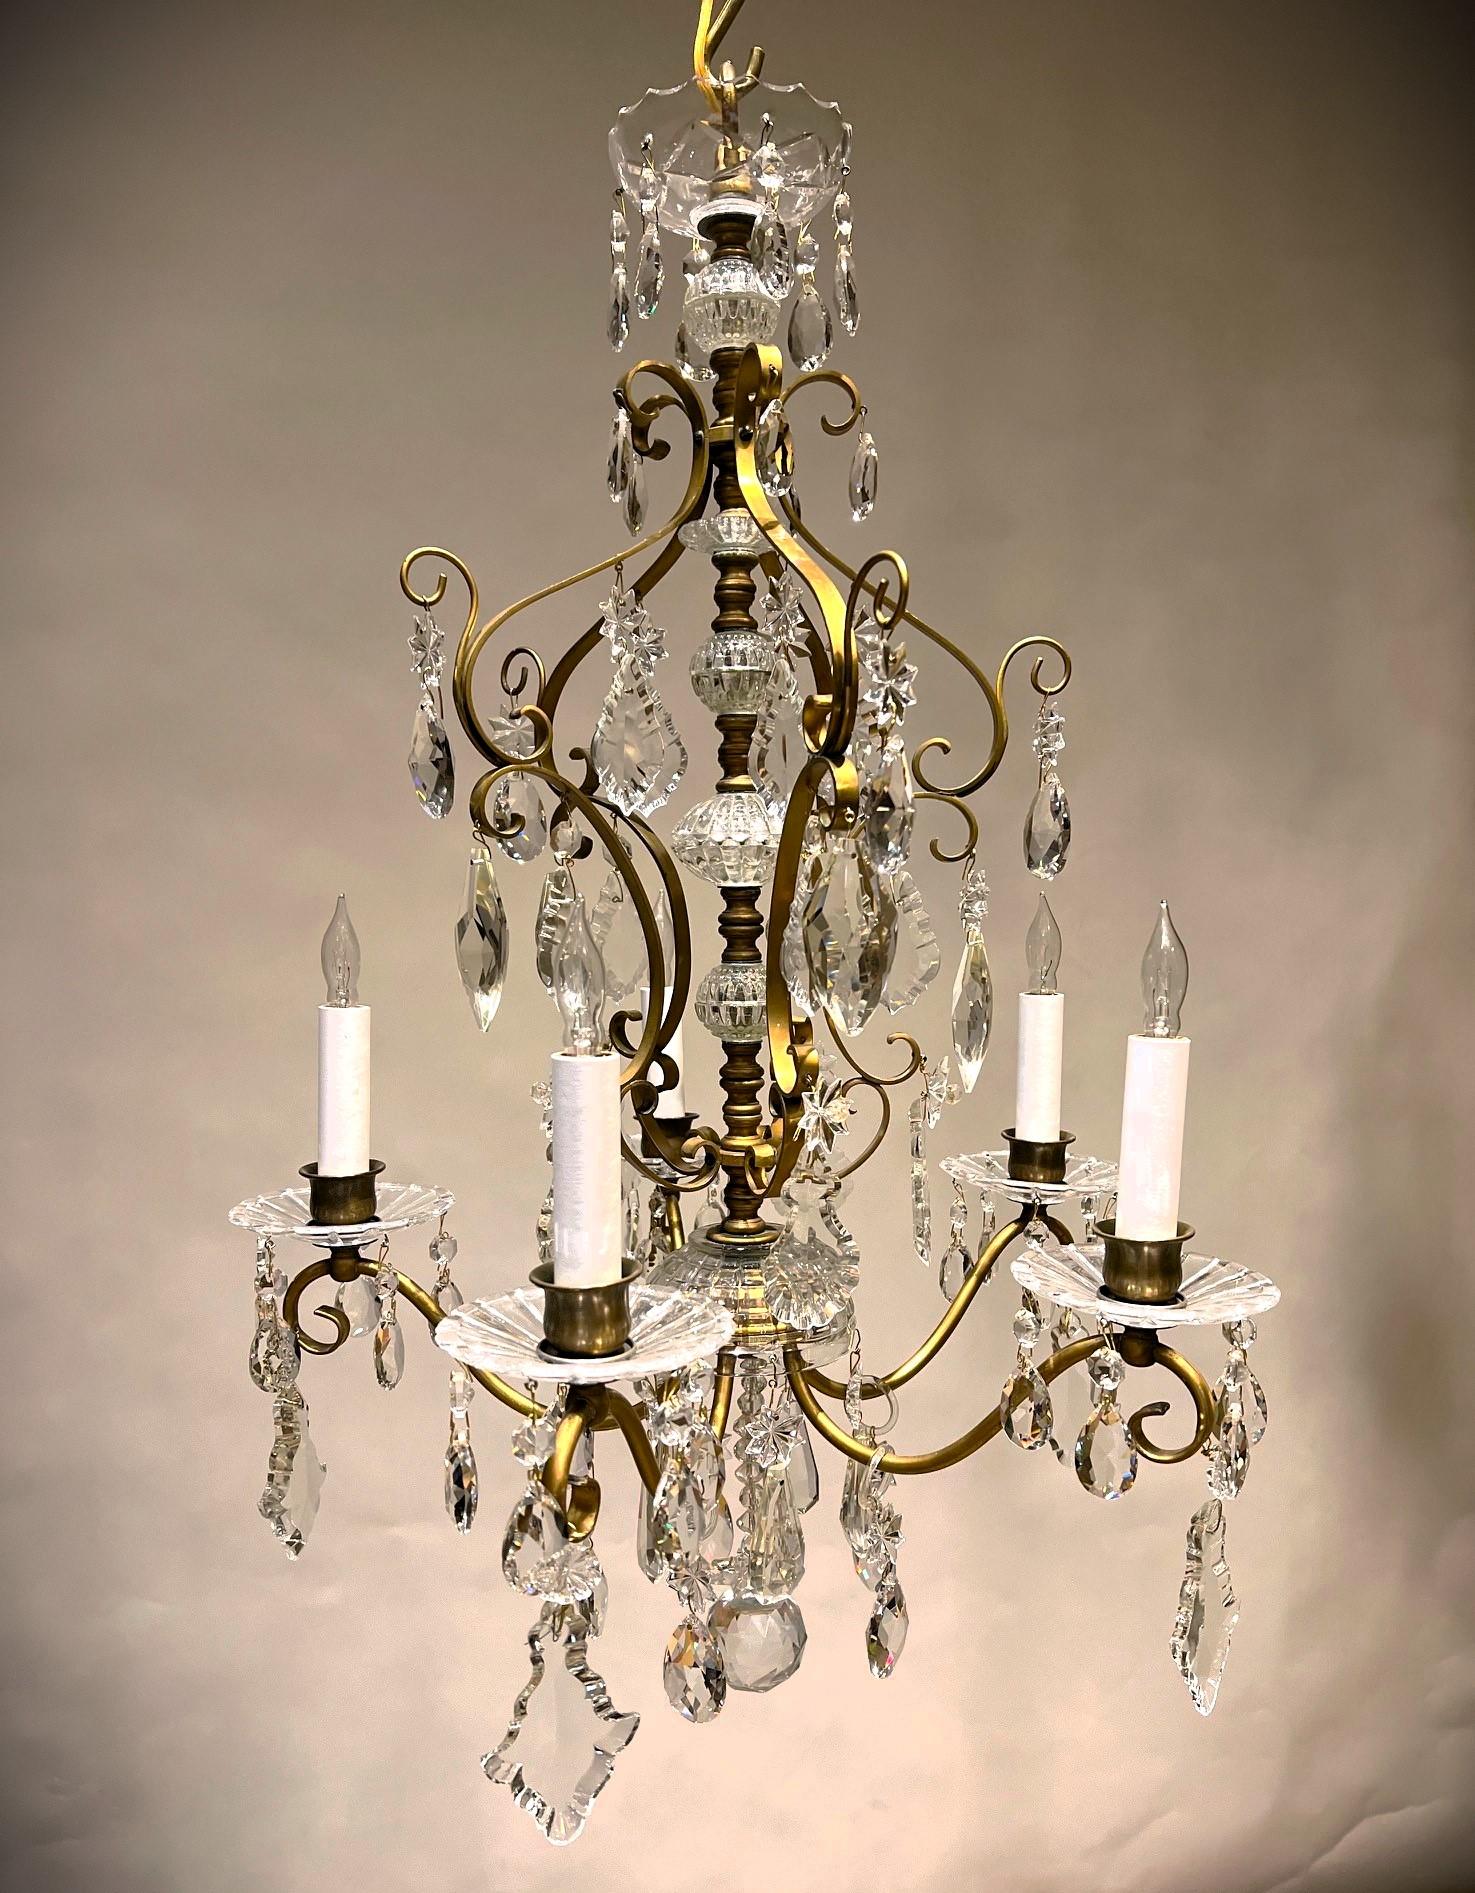 This charming early 20th Century Rococo style chandelier is the perfect size for a foyer or small living or dining room. The frame is hand-cast and -shaped brass with hand-cut crystal components. The fixture has a lovely patina and its crystal has